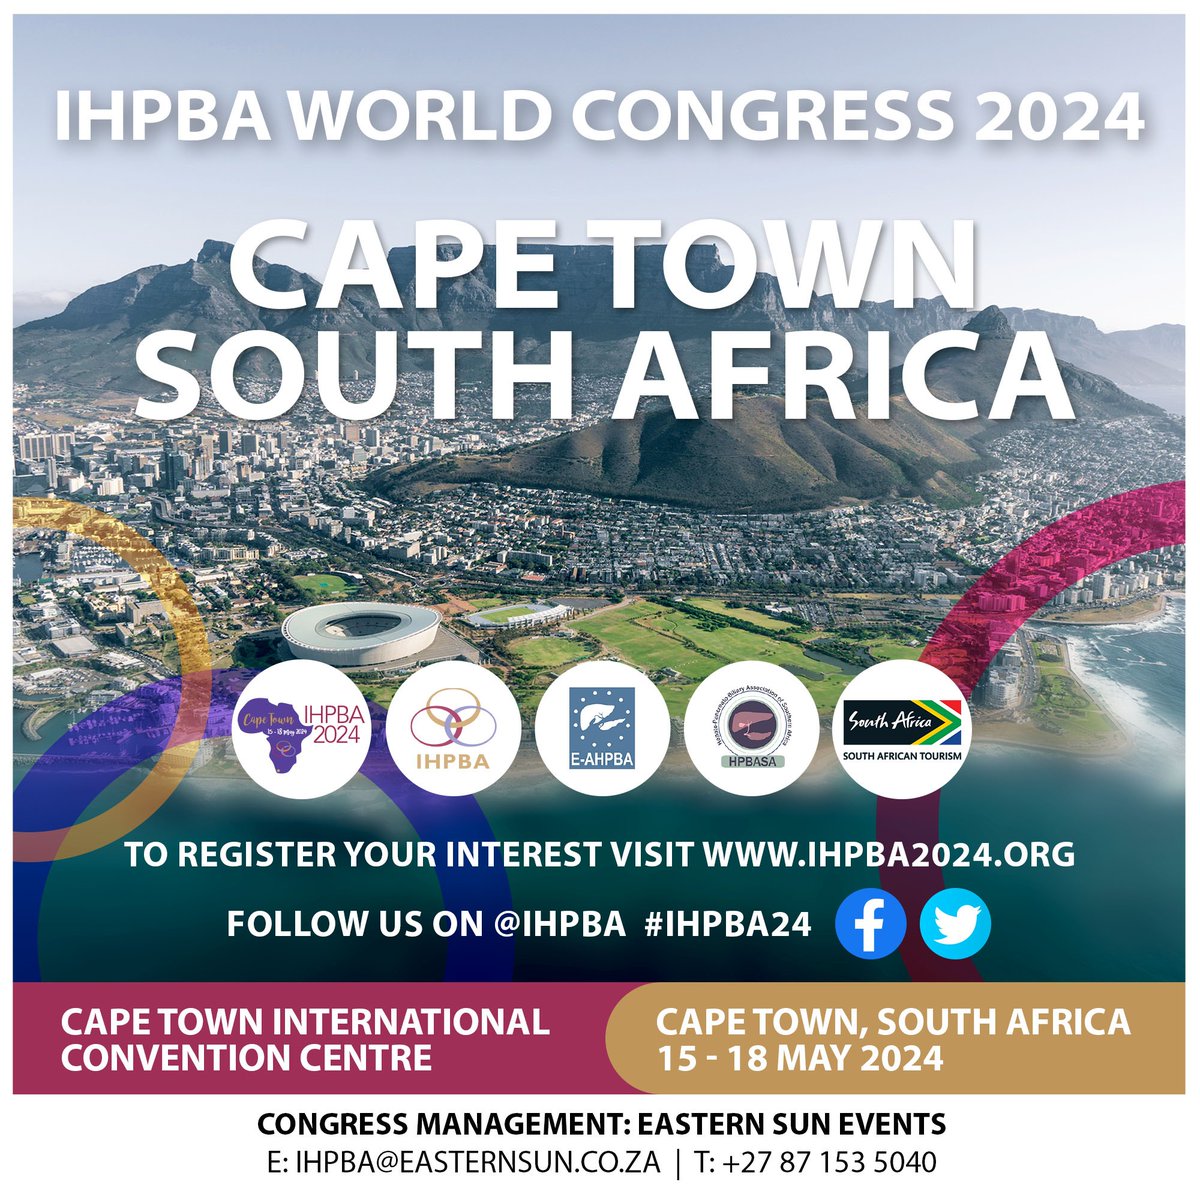 It’s official! Cape Town has been crowned the World’s Best Holiday Hotspot 2023, according to The UK Post Office Travel Money’s 17th annual Worldwide Holiday Costs Barometer. Why not extend your stay at #IHPBA2024. For info on pre/post Congress tours visit ihpba2024.org